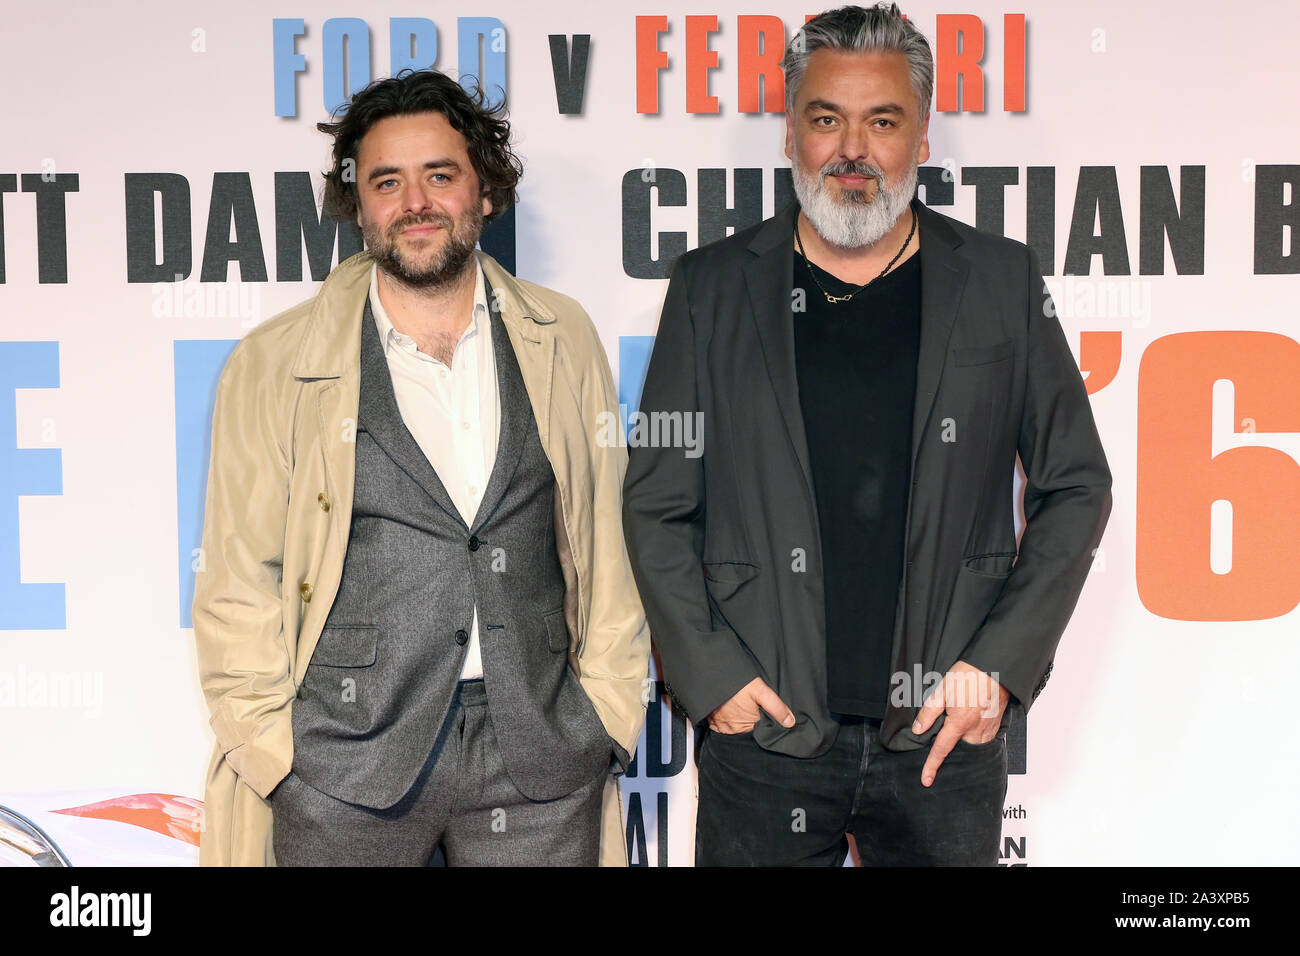 John-Henry Butterworth and Jez Butterworth, Le Mans 66 Premiere, BFI London Film Festival, Leicester Square, London, UK, 10 October 2019, Photo by Ric Stock Photo